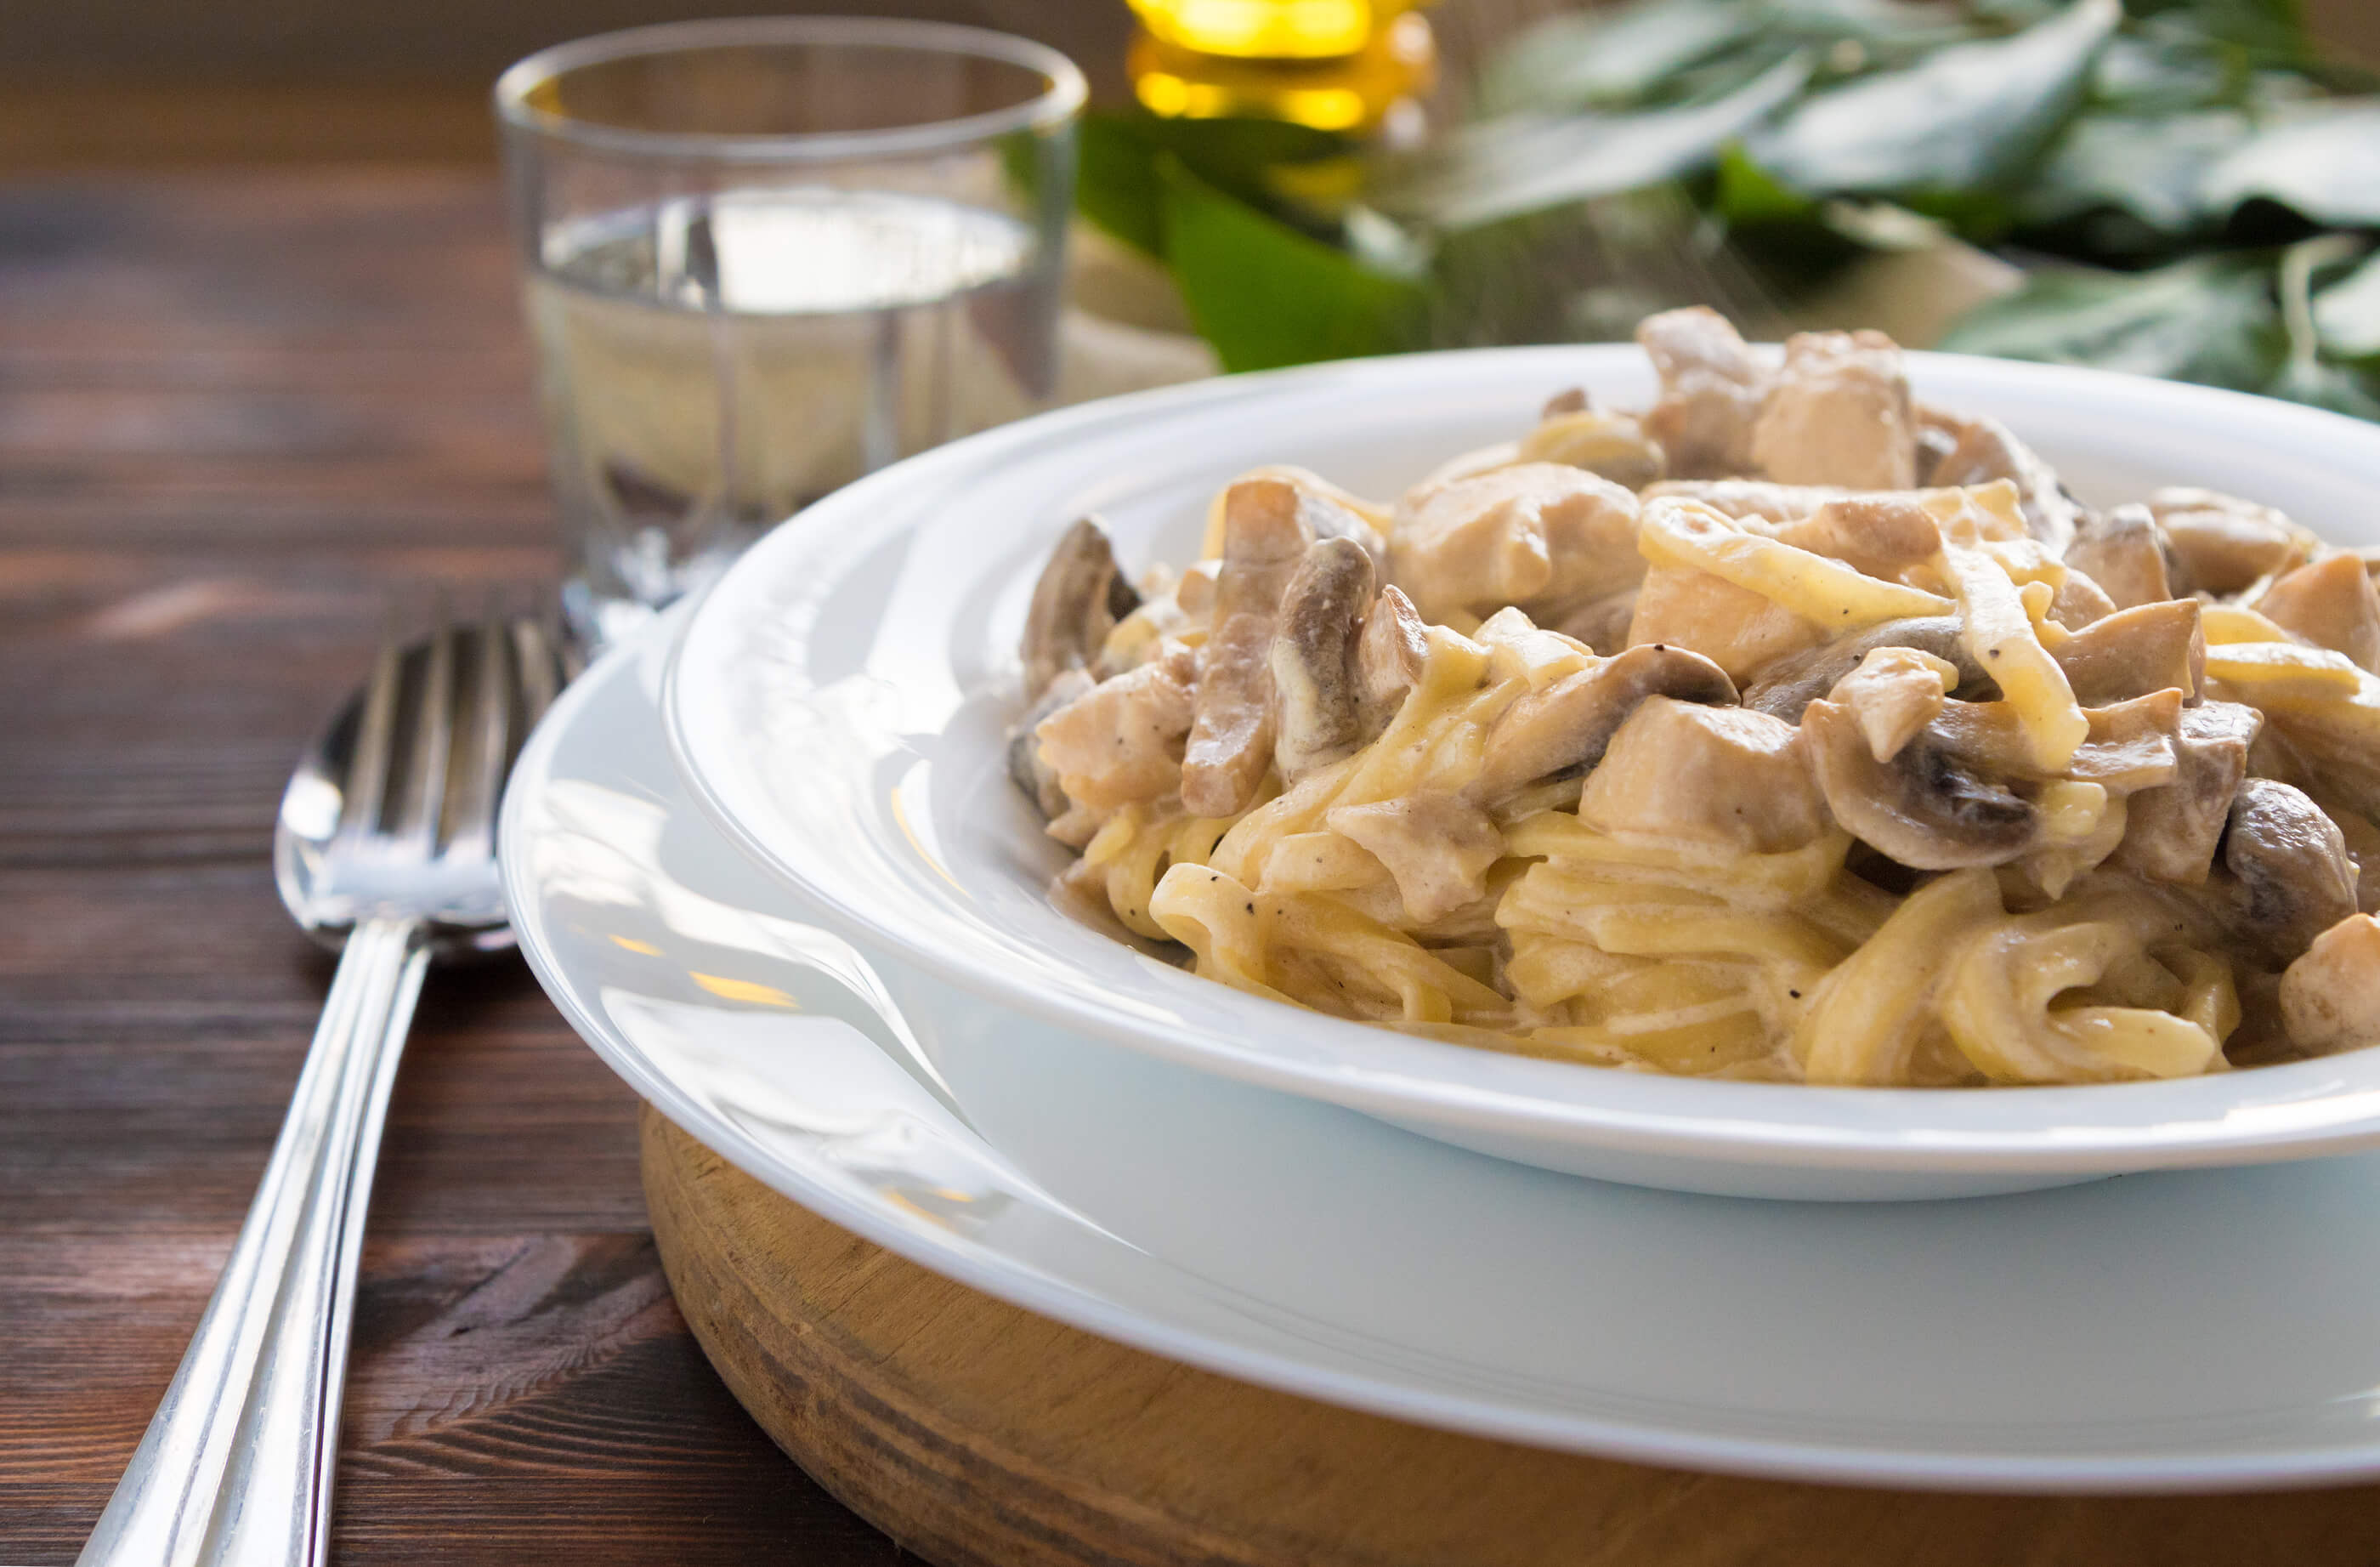 This chicken mushroom stroganoff is probably one of the easiest recipes I've ever made - and it's on plan! Juicy mushrooms, tender chicken, and a sauce that's to die for